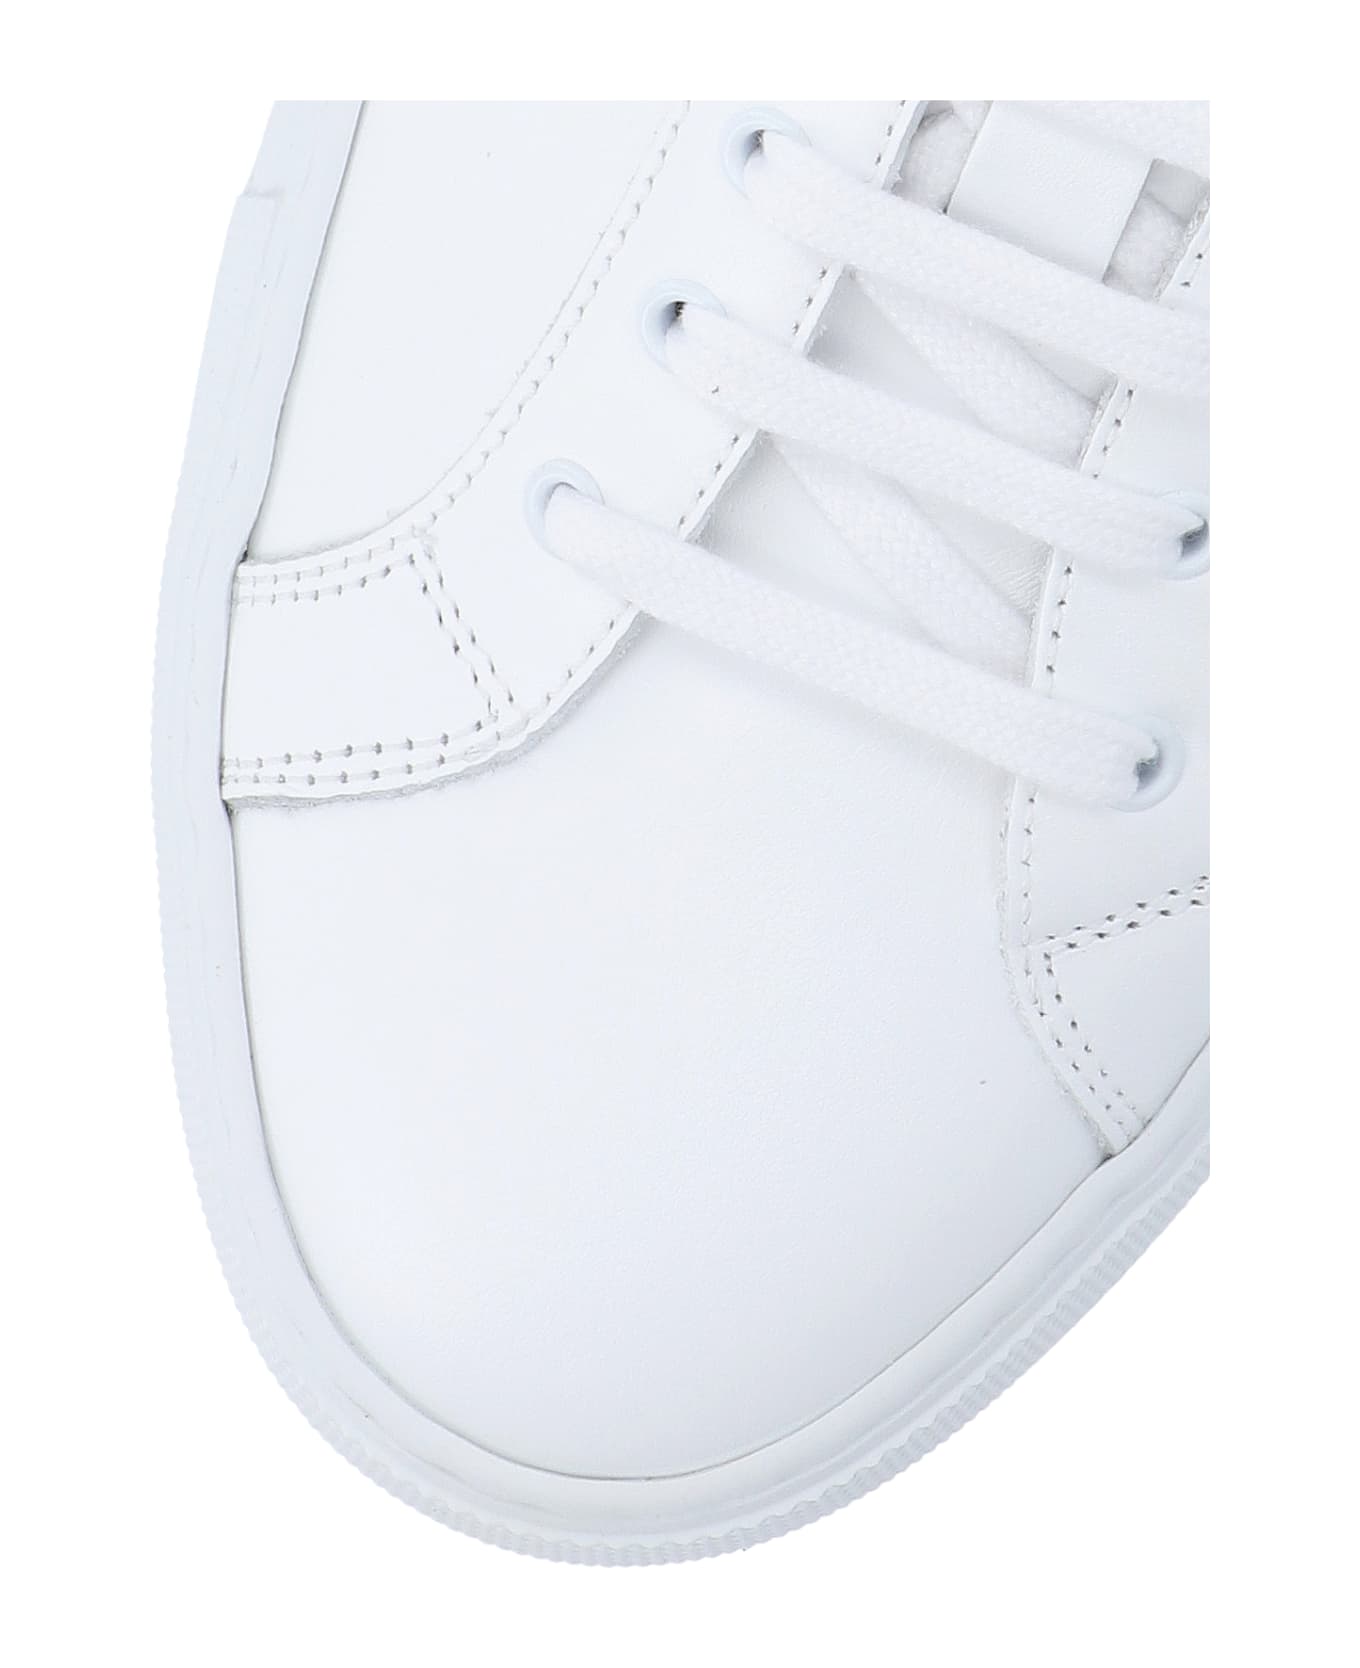 Common Projects White Leather Back Sneakers - White